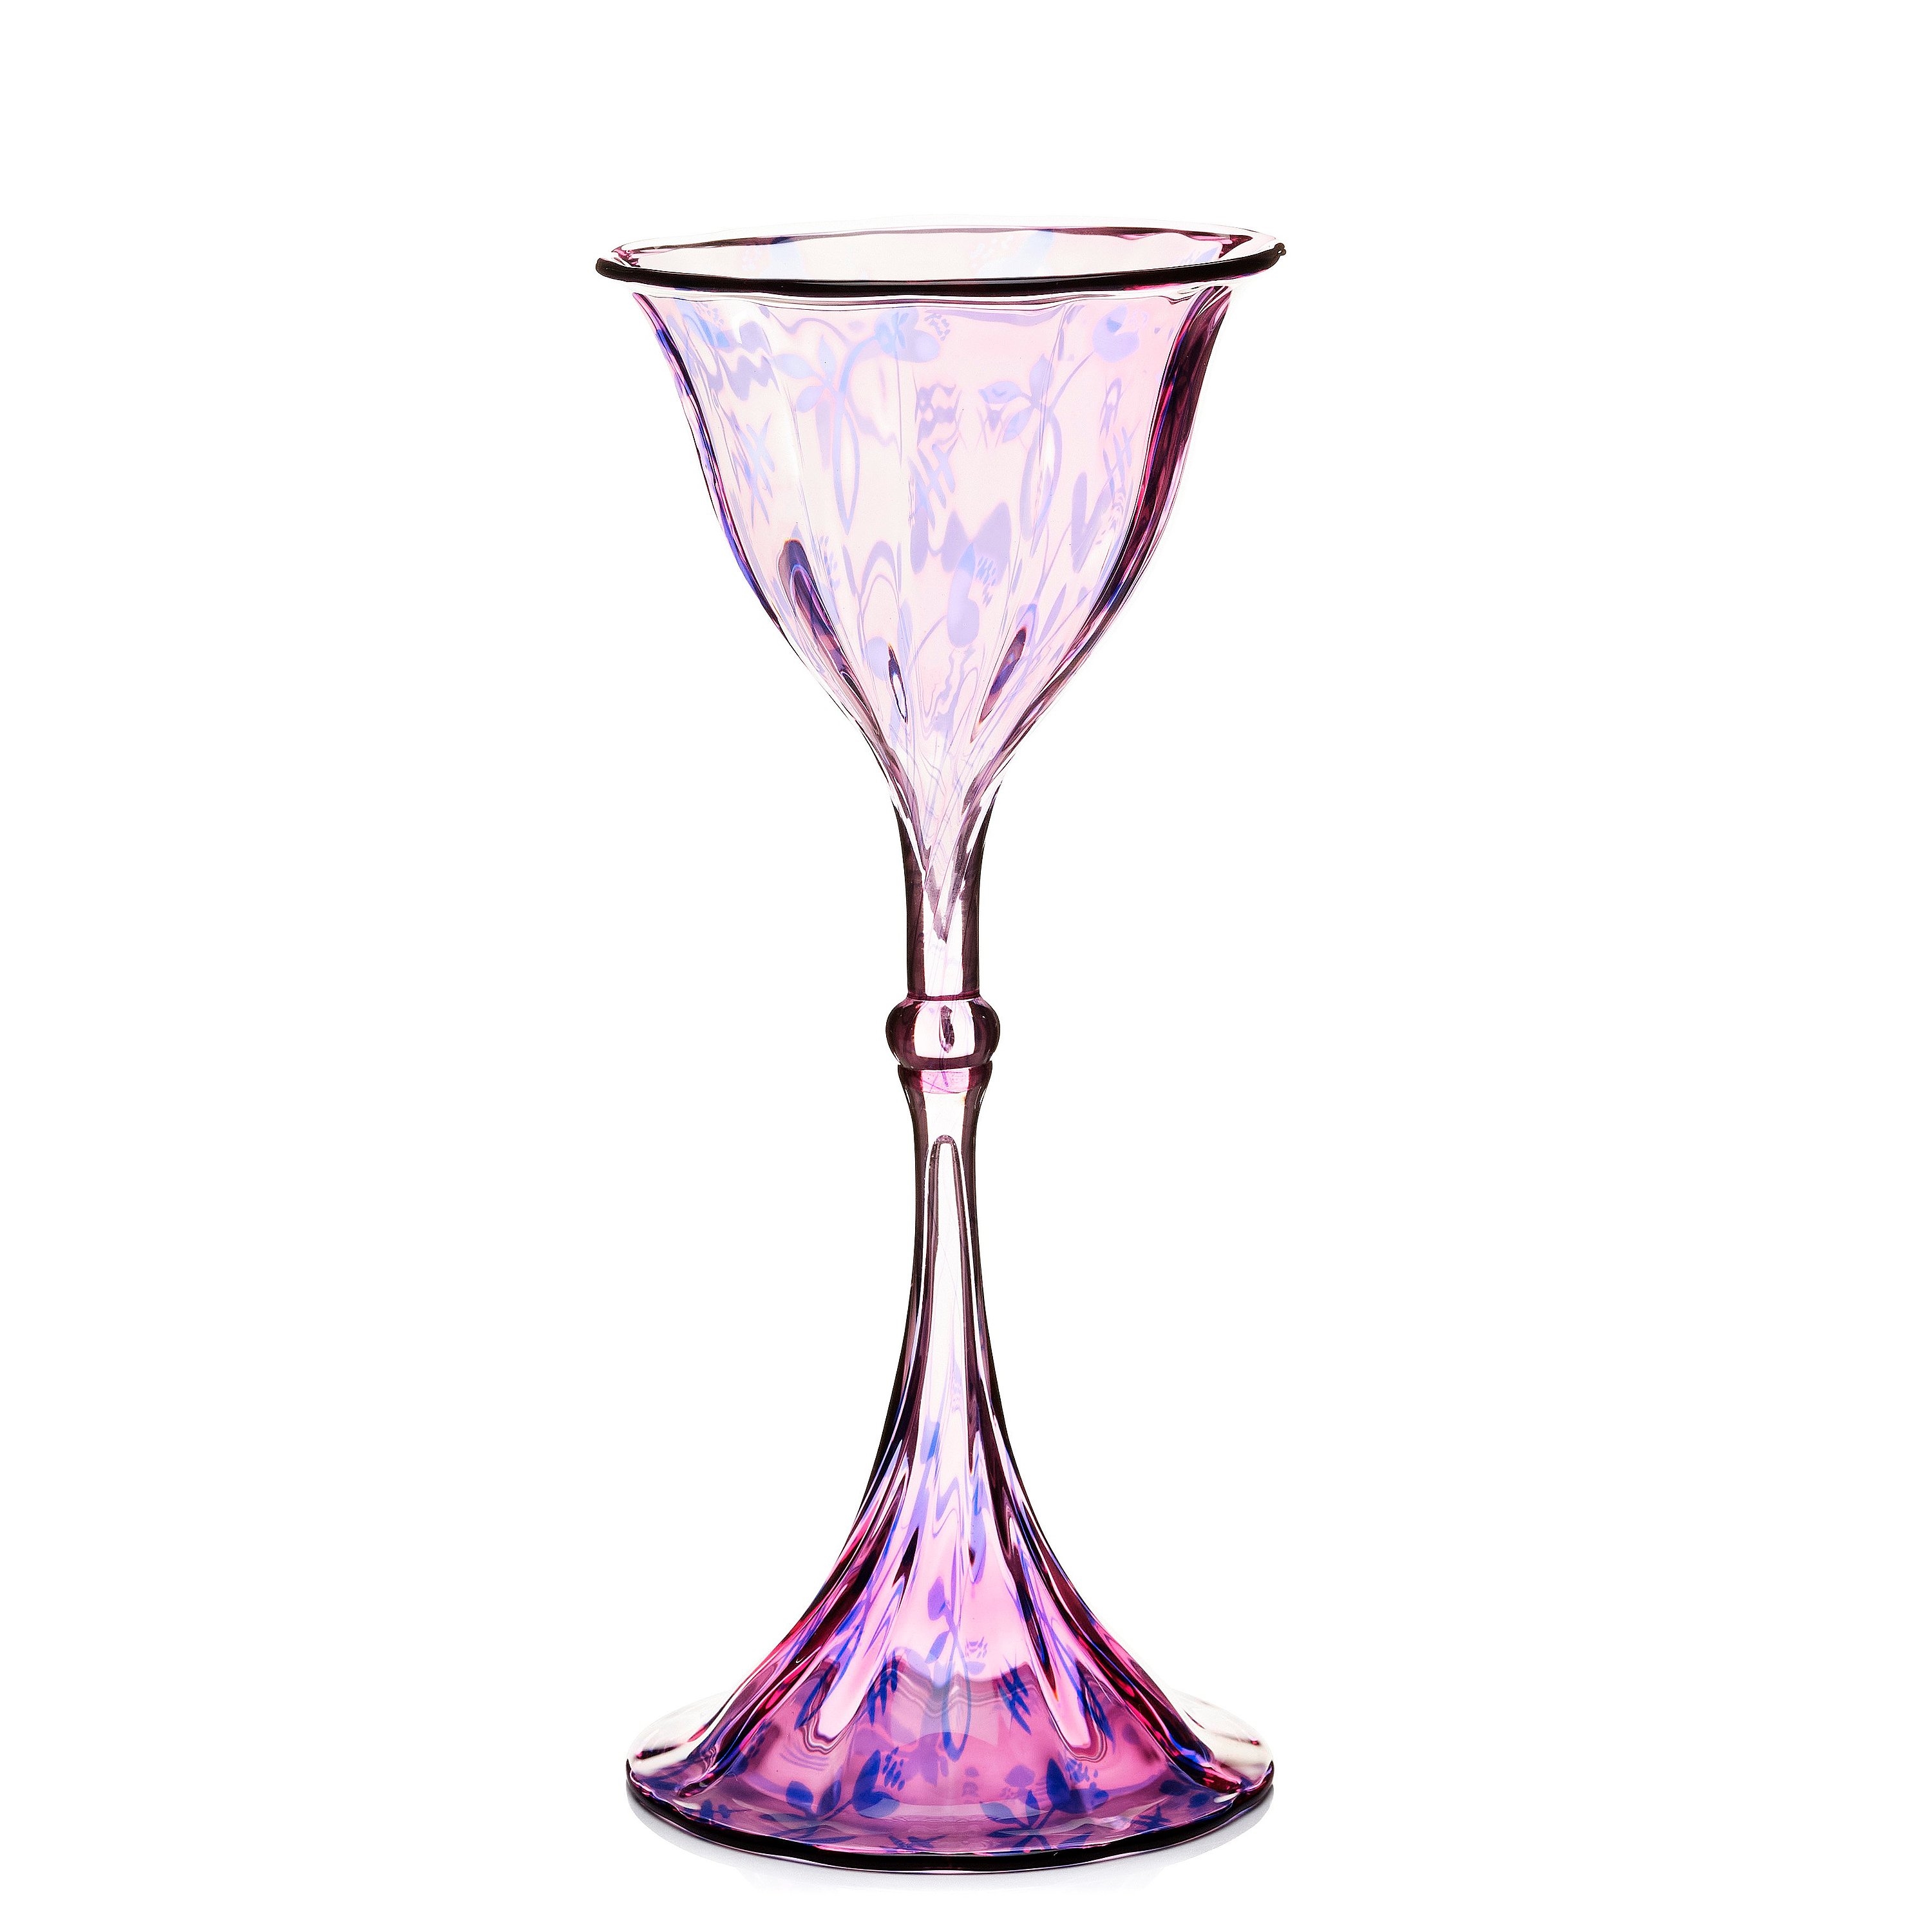 A 'graal' glass goblet